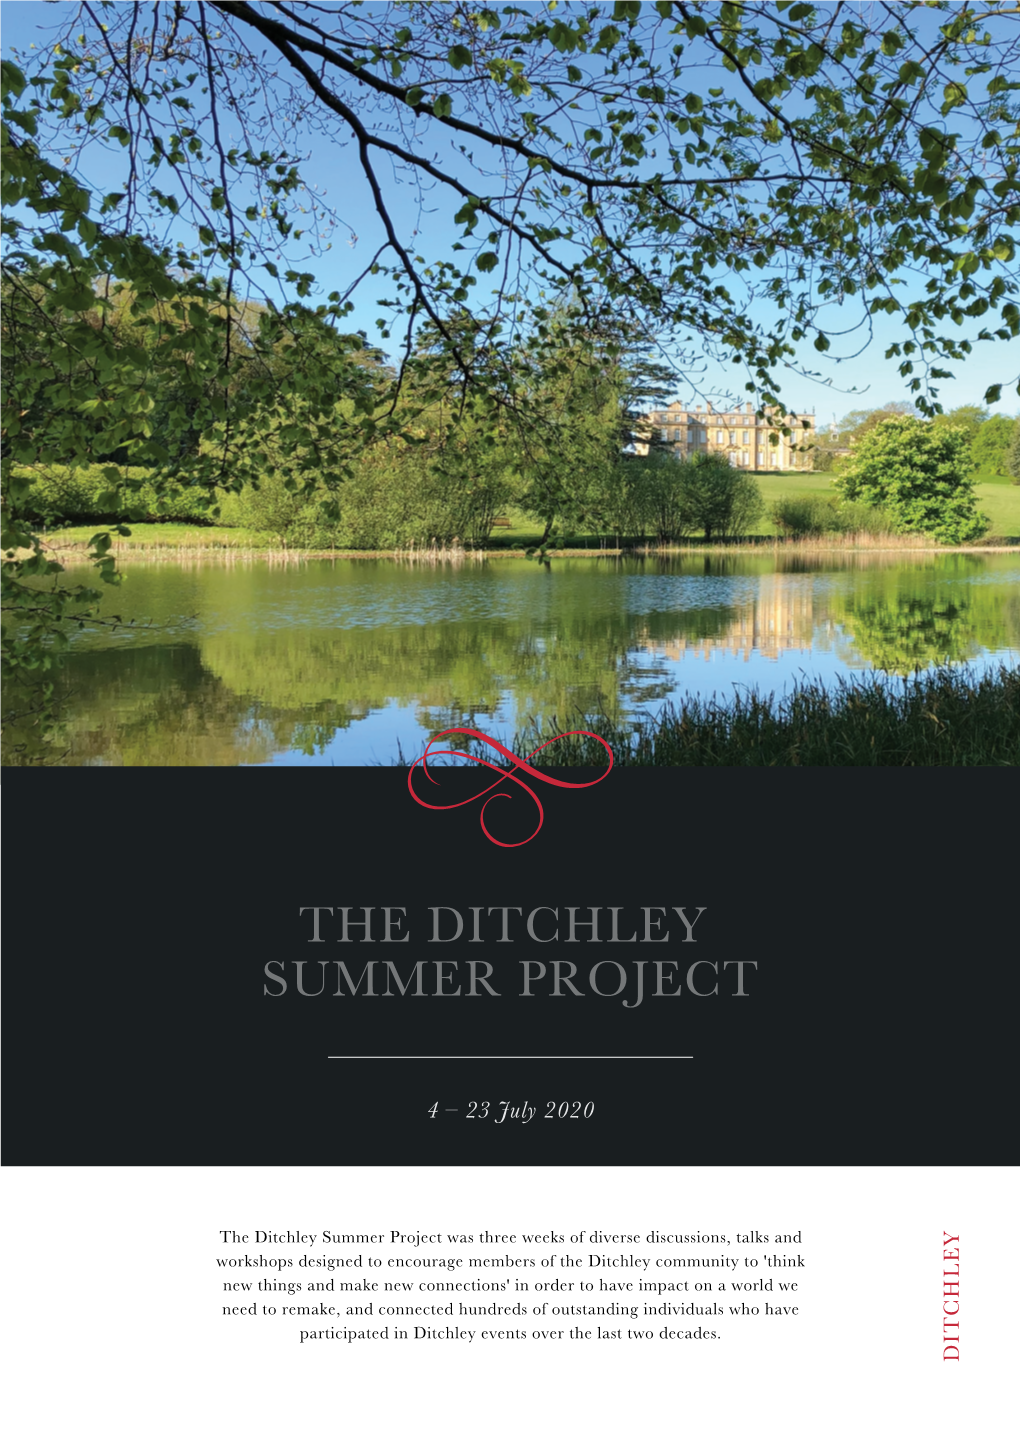 The Ditchley Summer Project